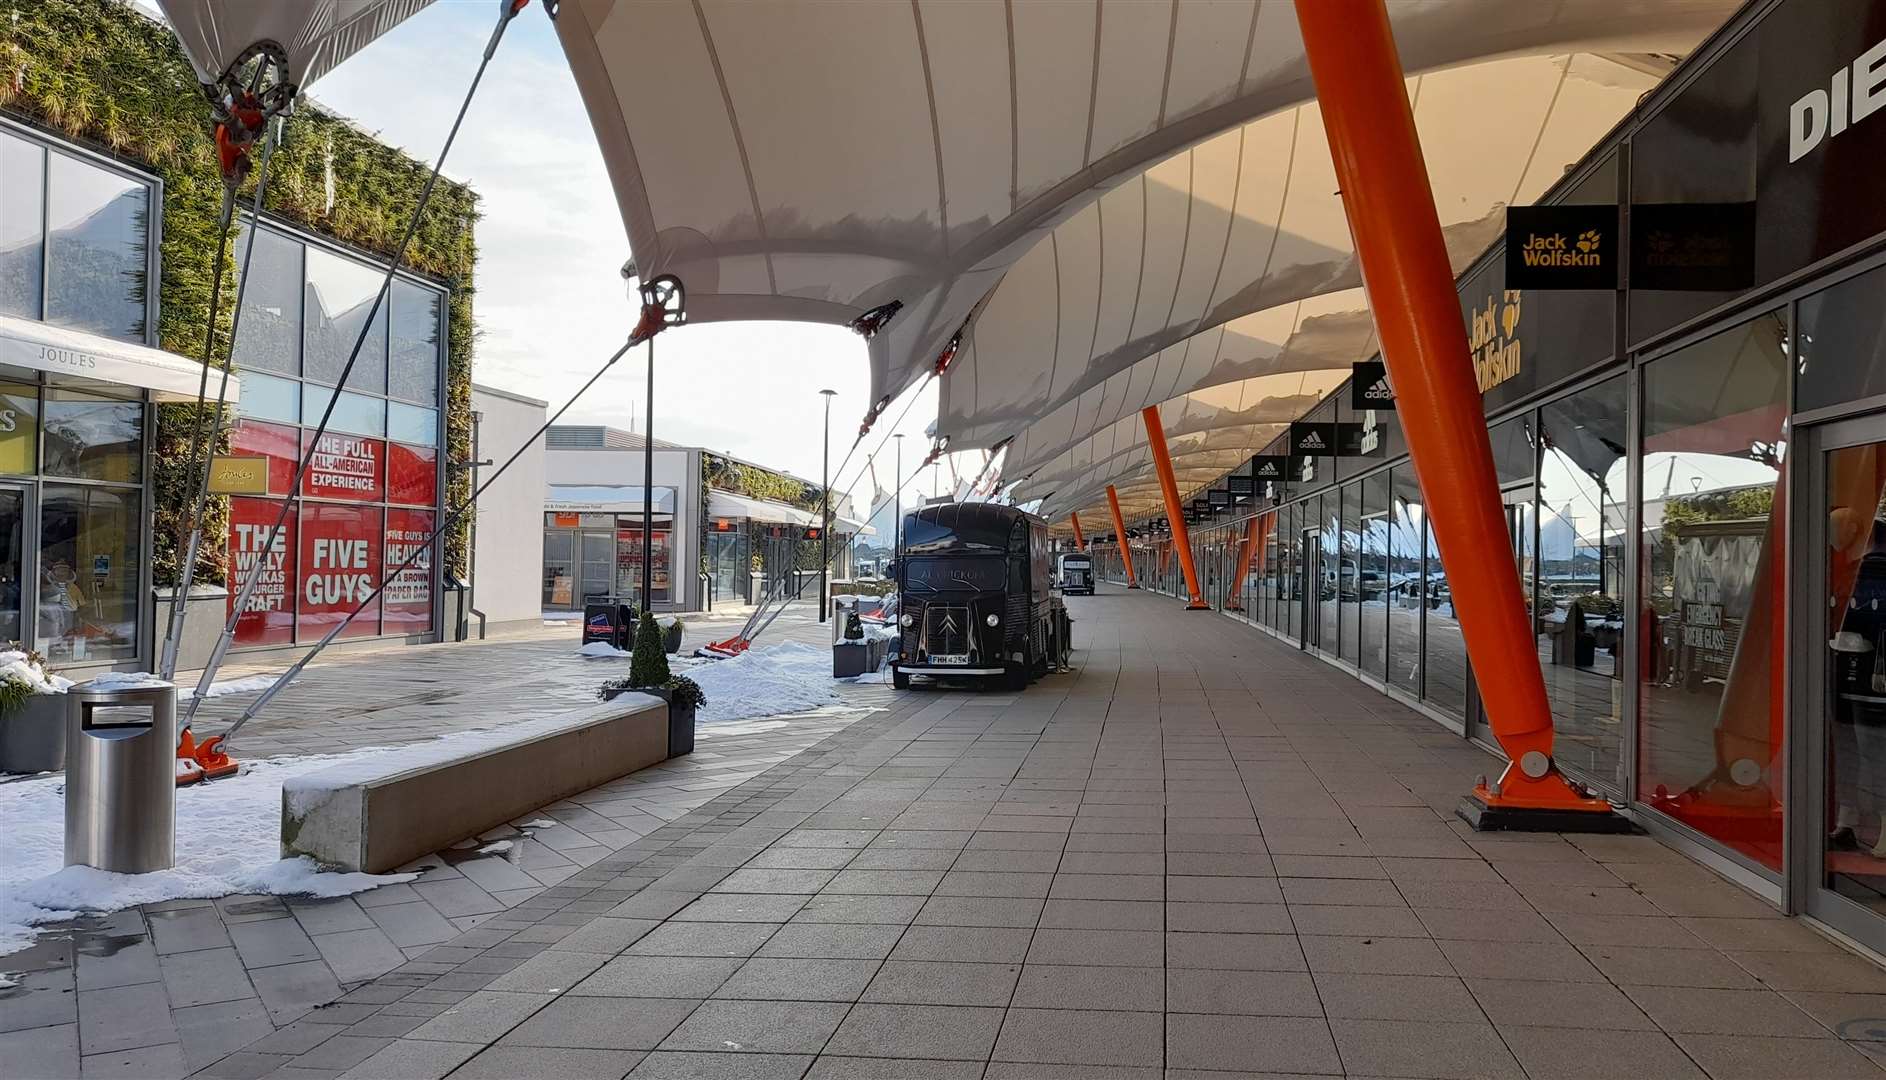 Where old meets new: the Outlet's £90m extension opened in November 2019